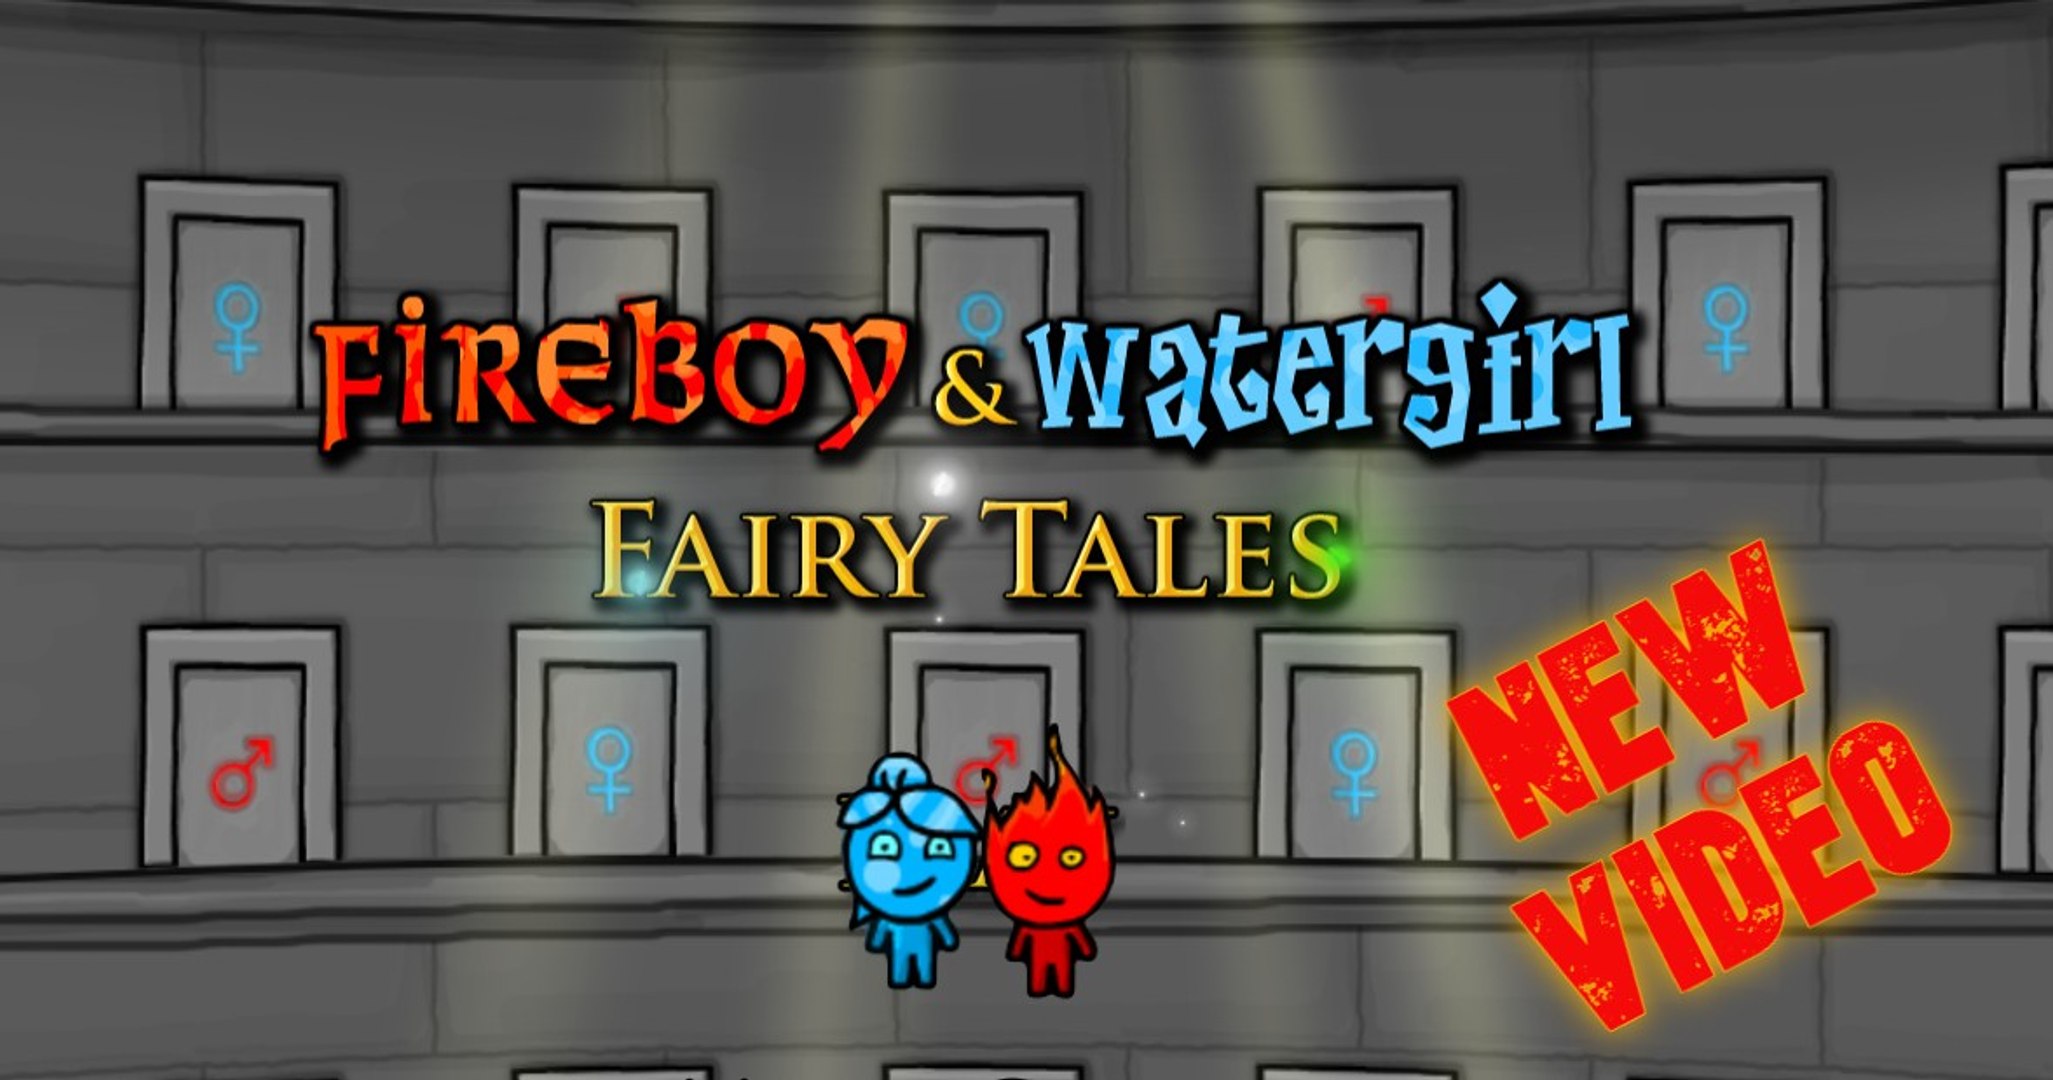 Fireboy and Watergirl 6: Fairy Tales - Jogo Gratuito Online